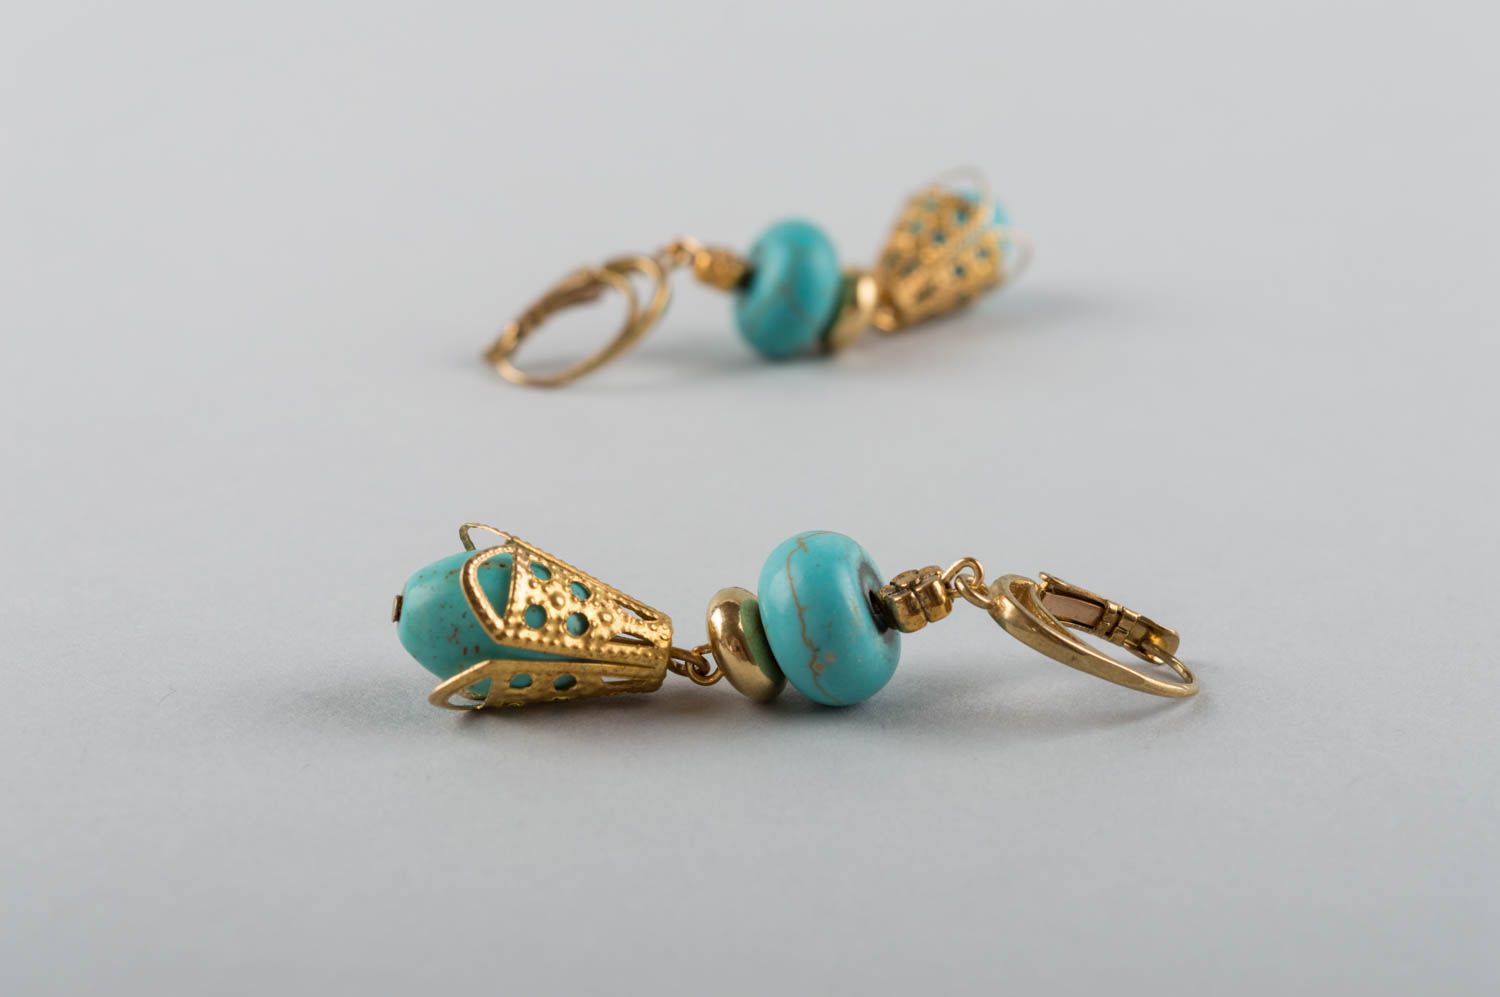 Handmade accessory made of natural stones earrings made of turquoise and brass photo 5